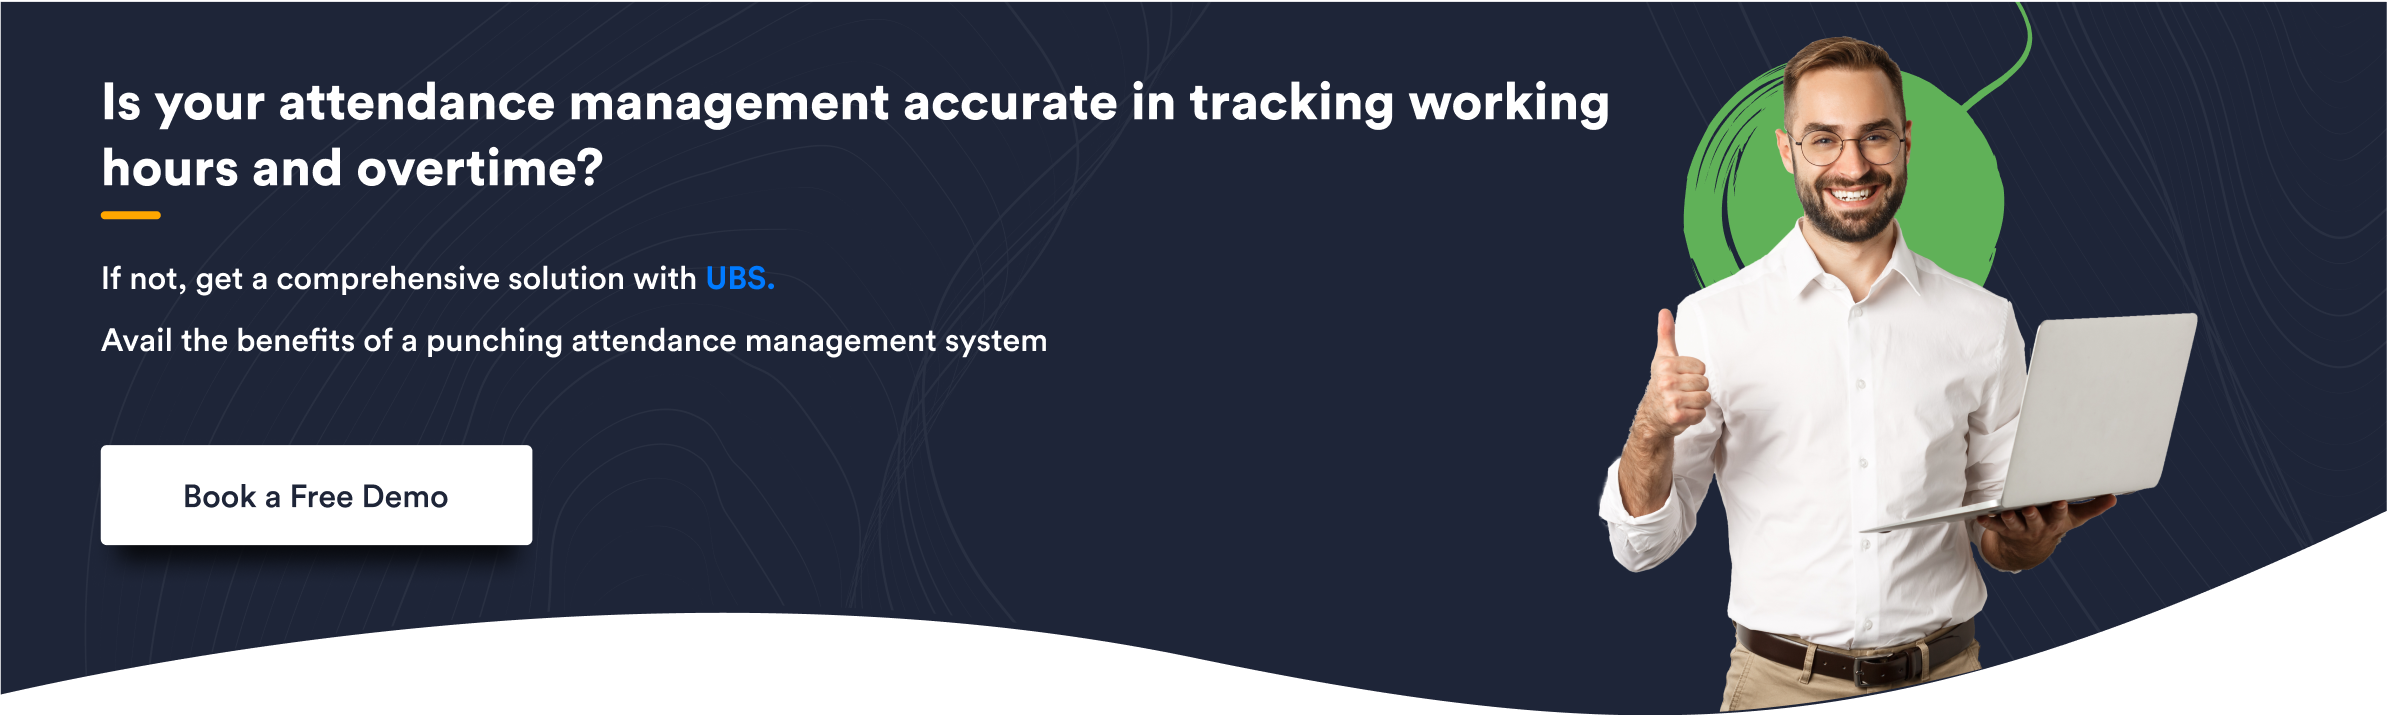 Is your attendance management accurate in tracking working hours and overtime